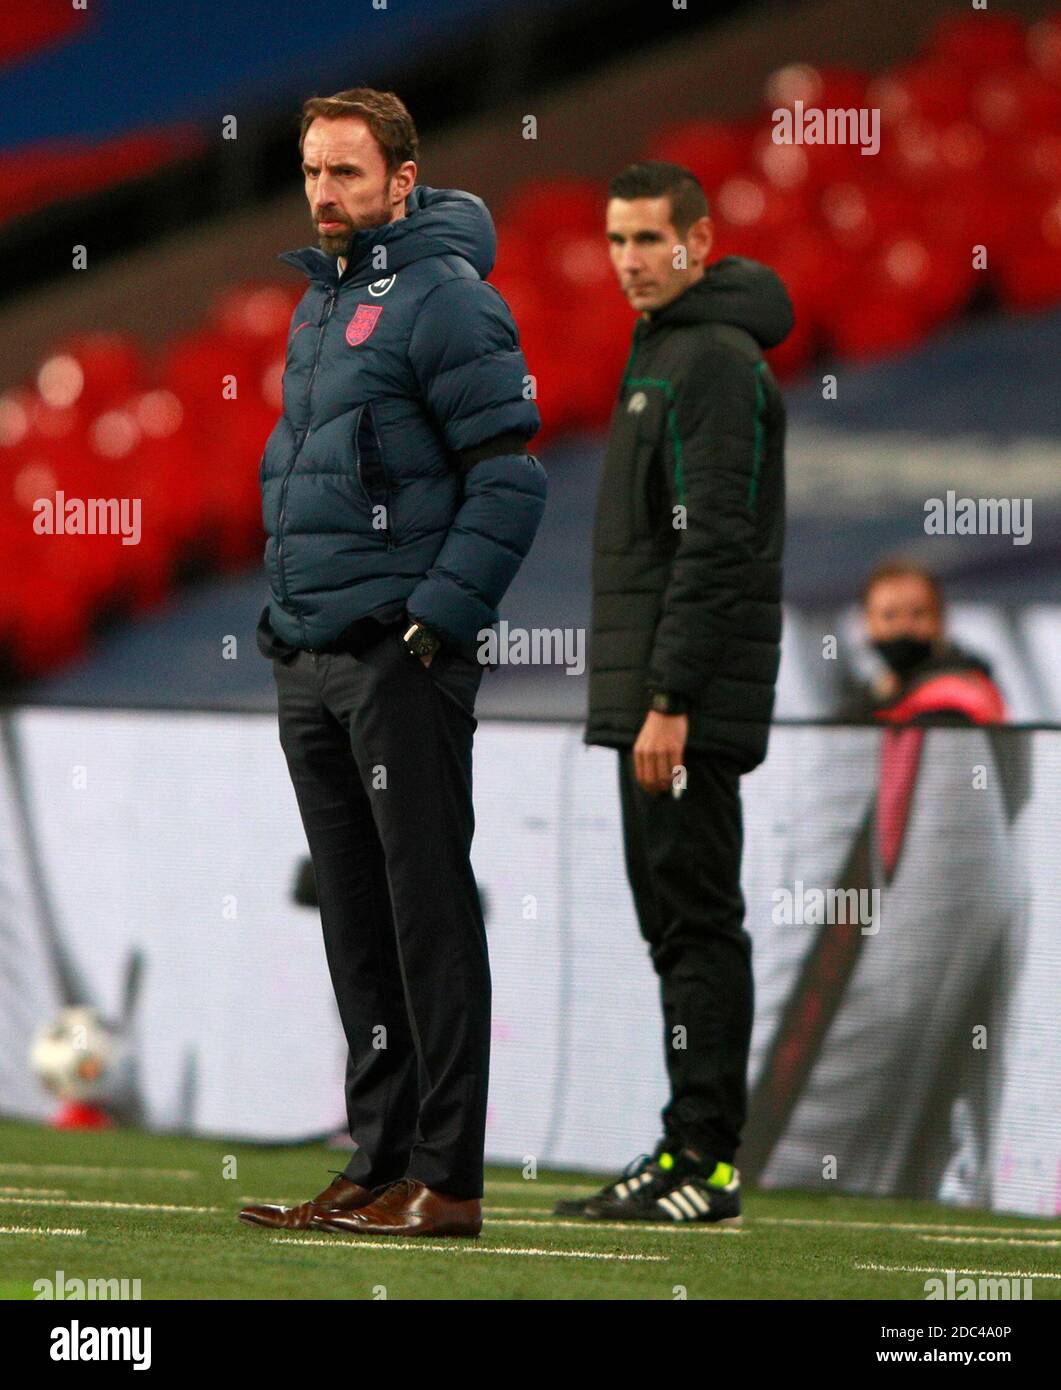 England manager Gareth Southgate (left) on the touchline during the UEFA Nations League Group A2 match at Wembley Stadium, London. Stock Photo